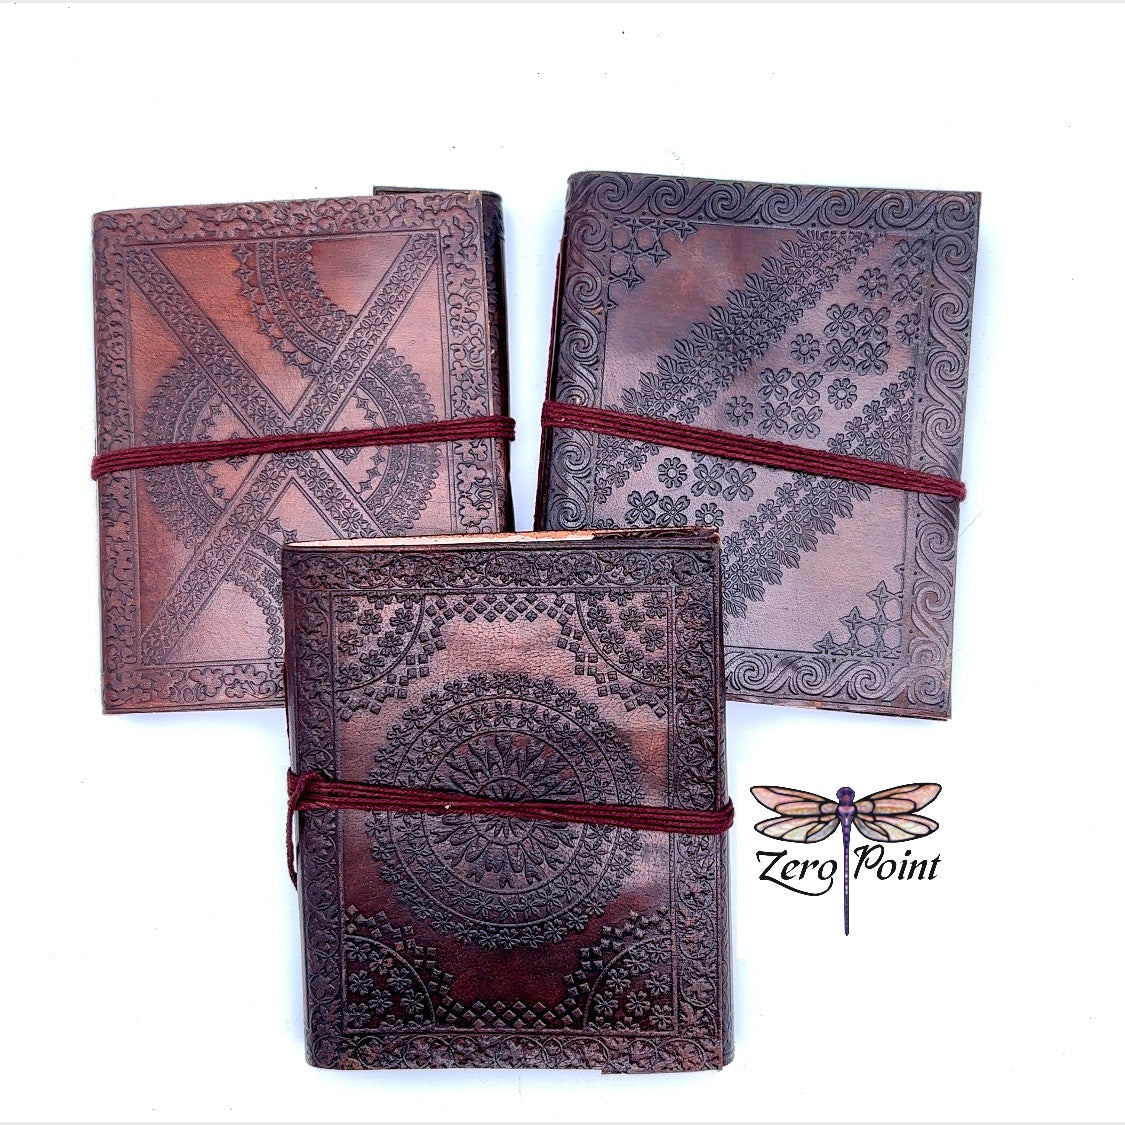 Leather 6x5" Embossed Journal - Zero Point Crystals